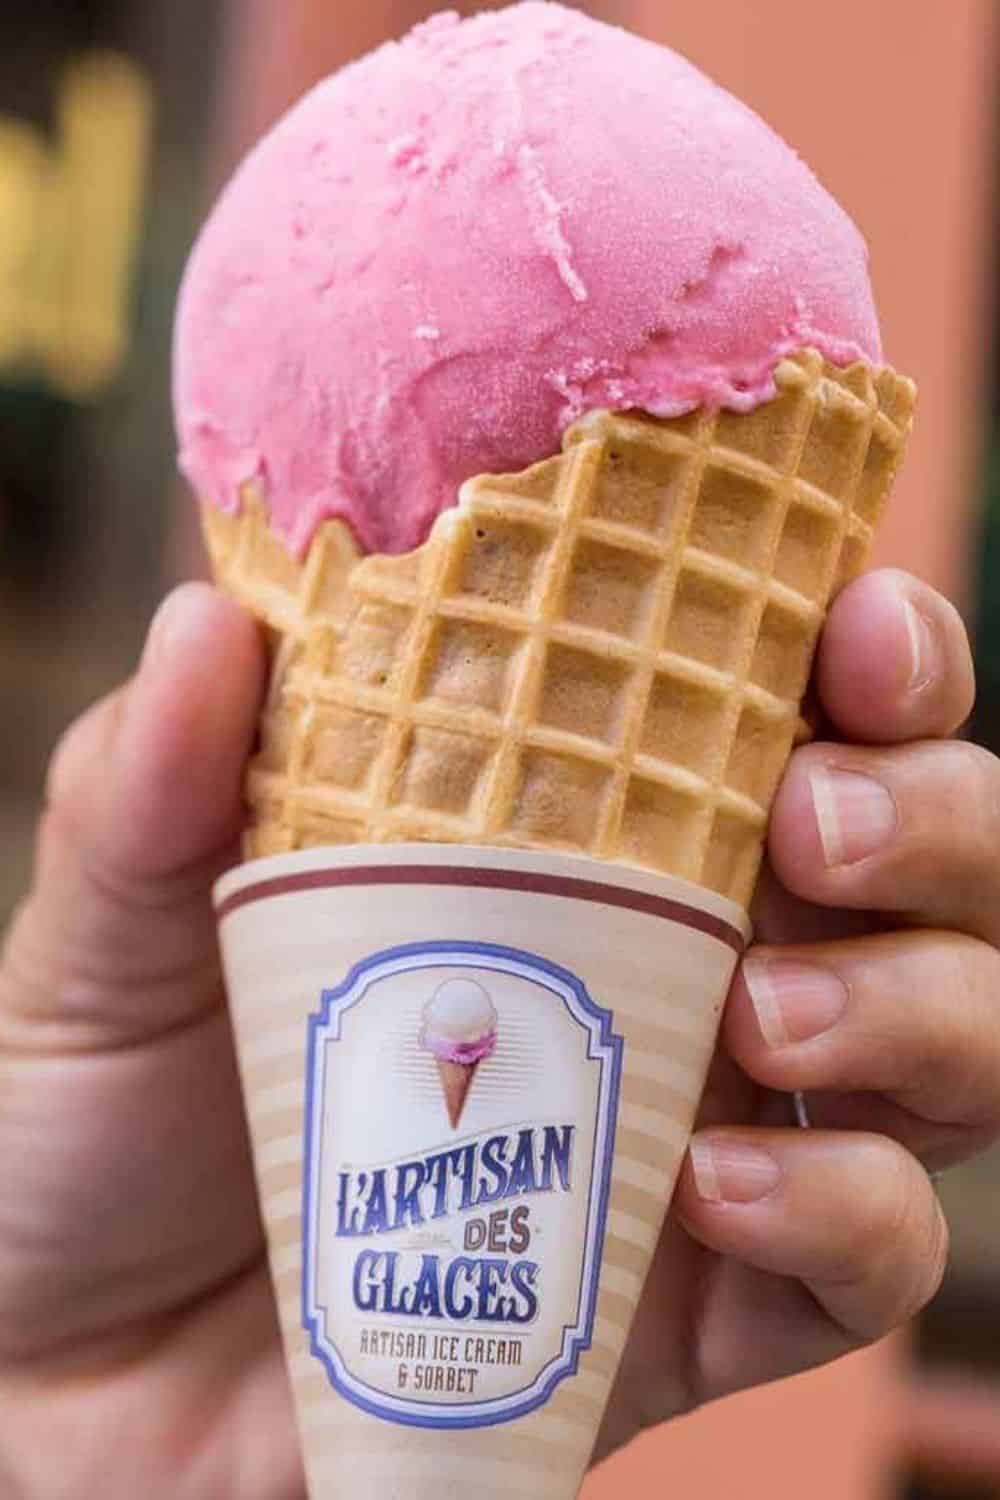 Closeup of a person holding a waffle cone with raspberry gelato from L'Artisan des Glaces at Disney World's Epcot.